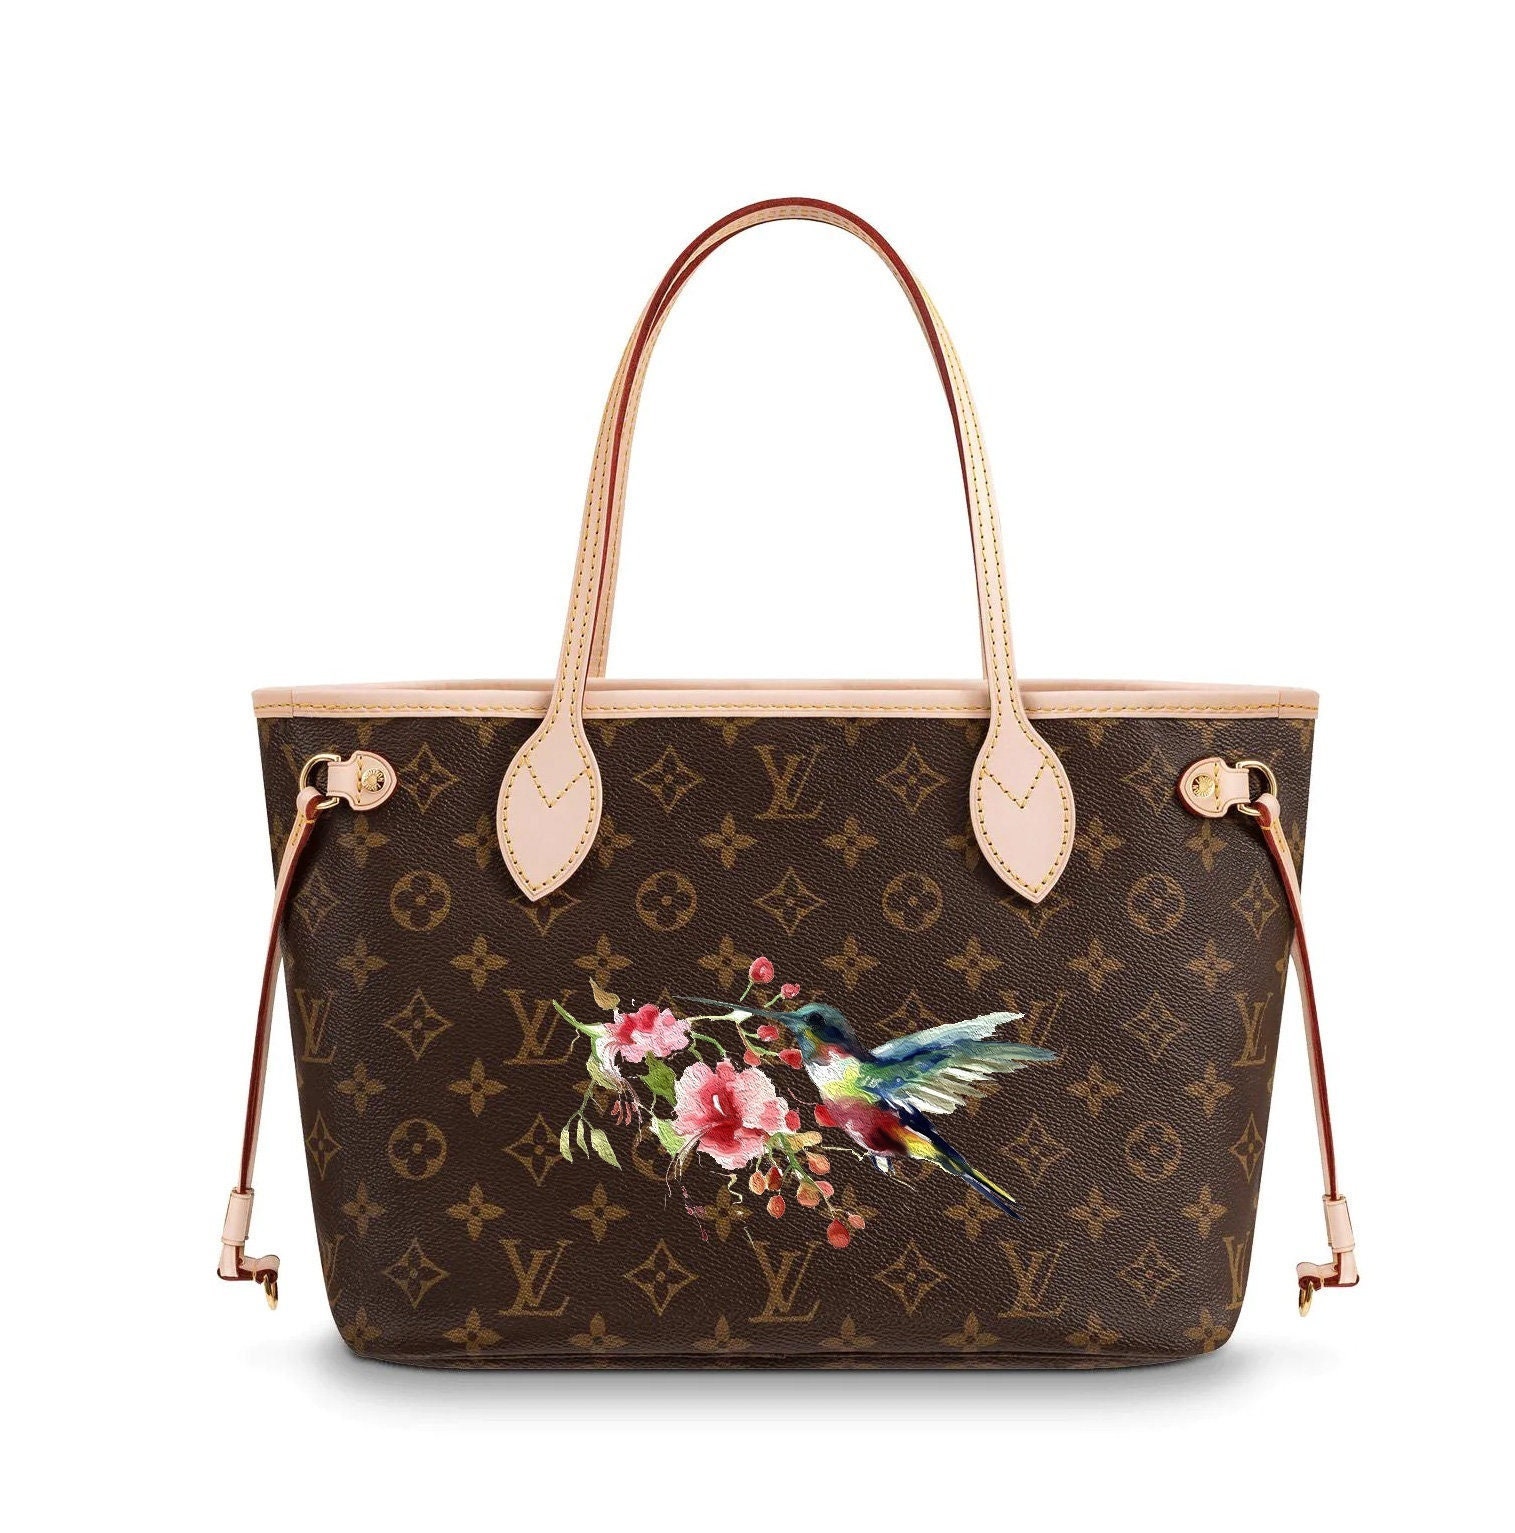 Louis Vuitton Custom Painted with Lotus Floral in Pink Artwork